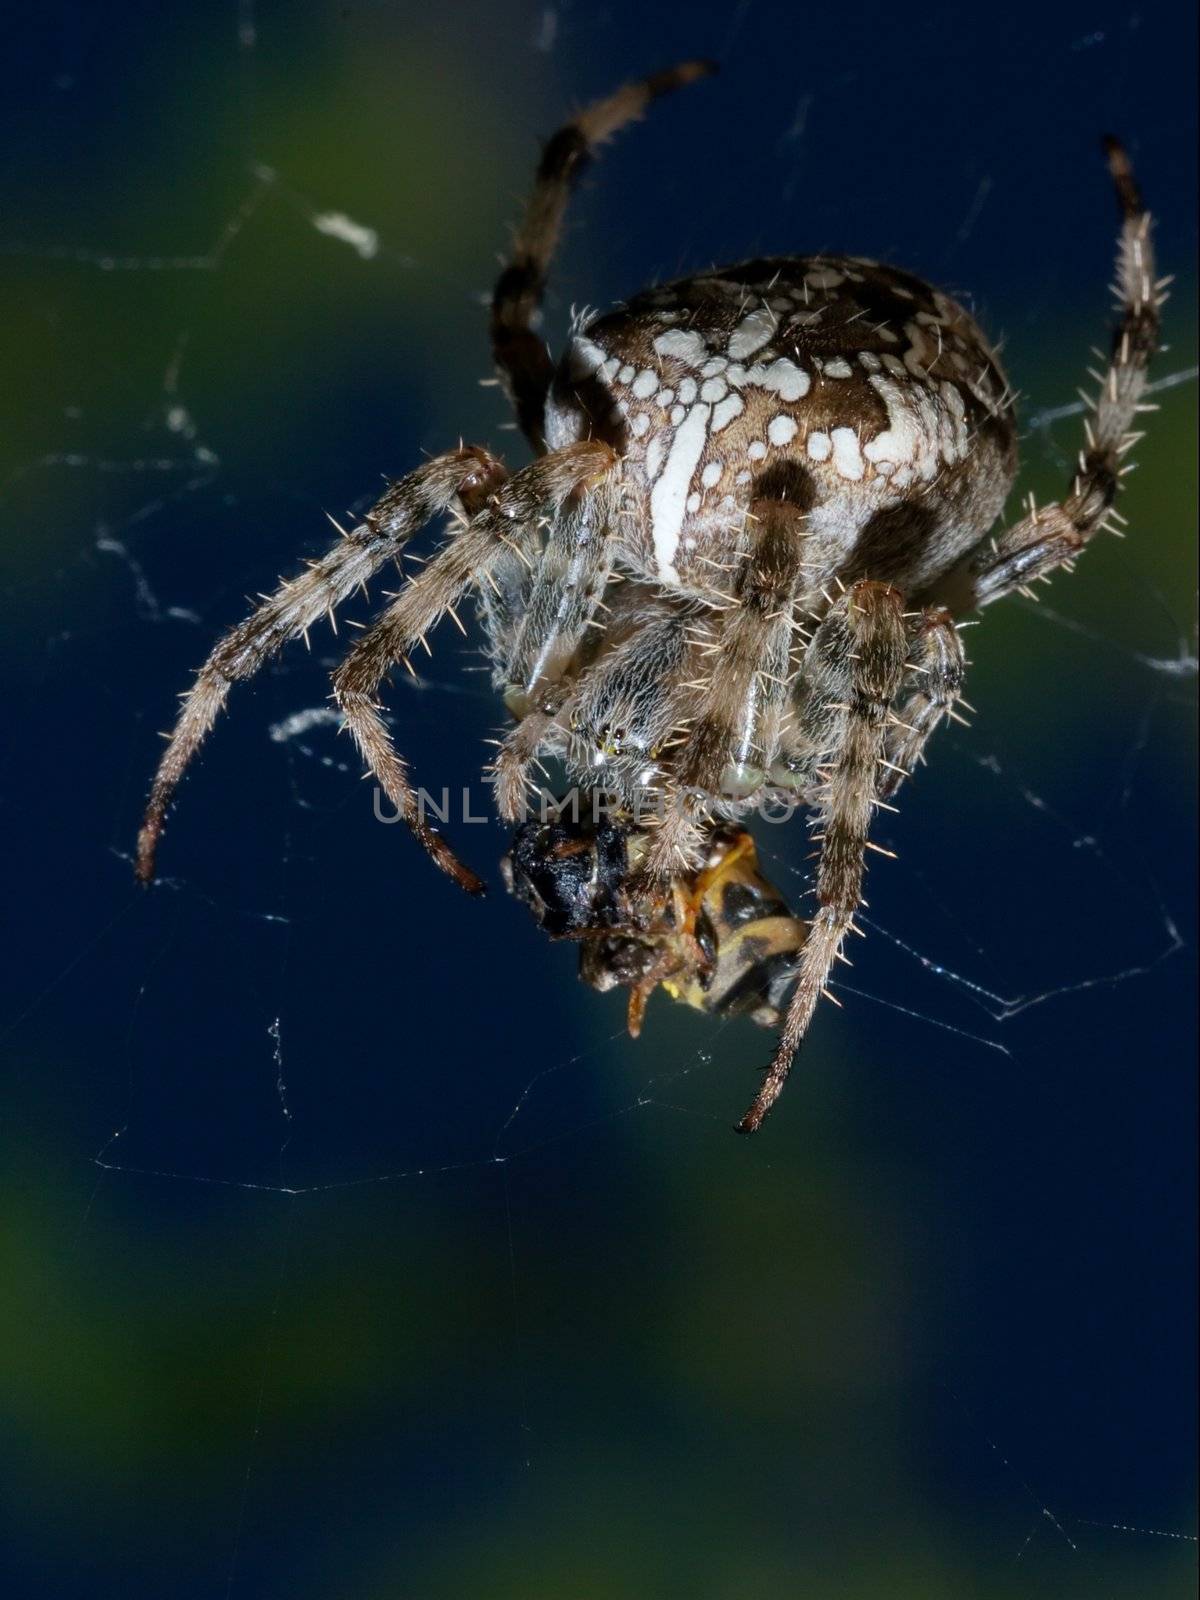 Cross-spider eating the victim caught in the web